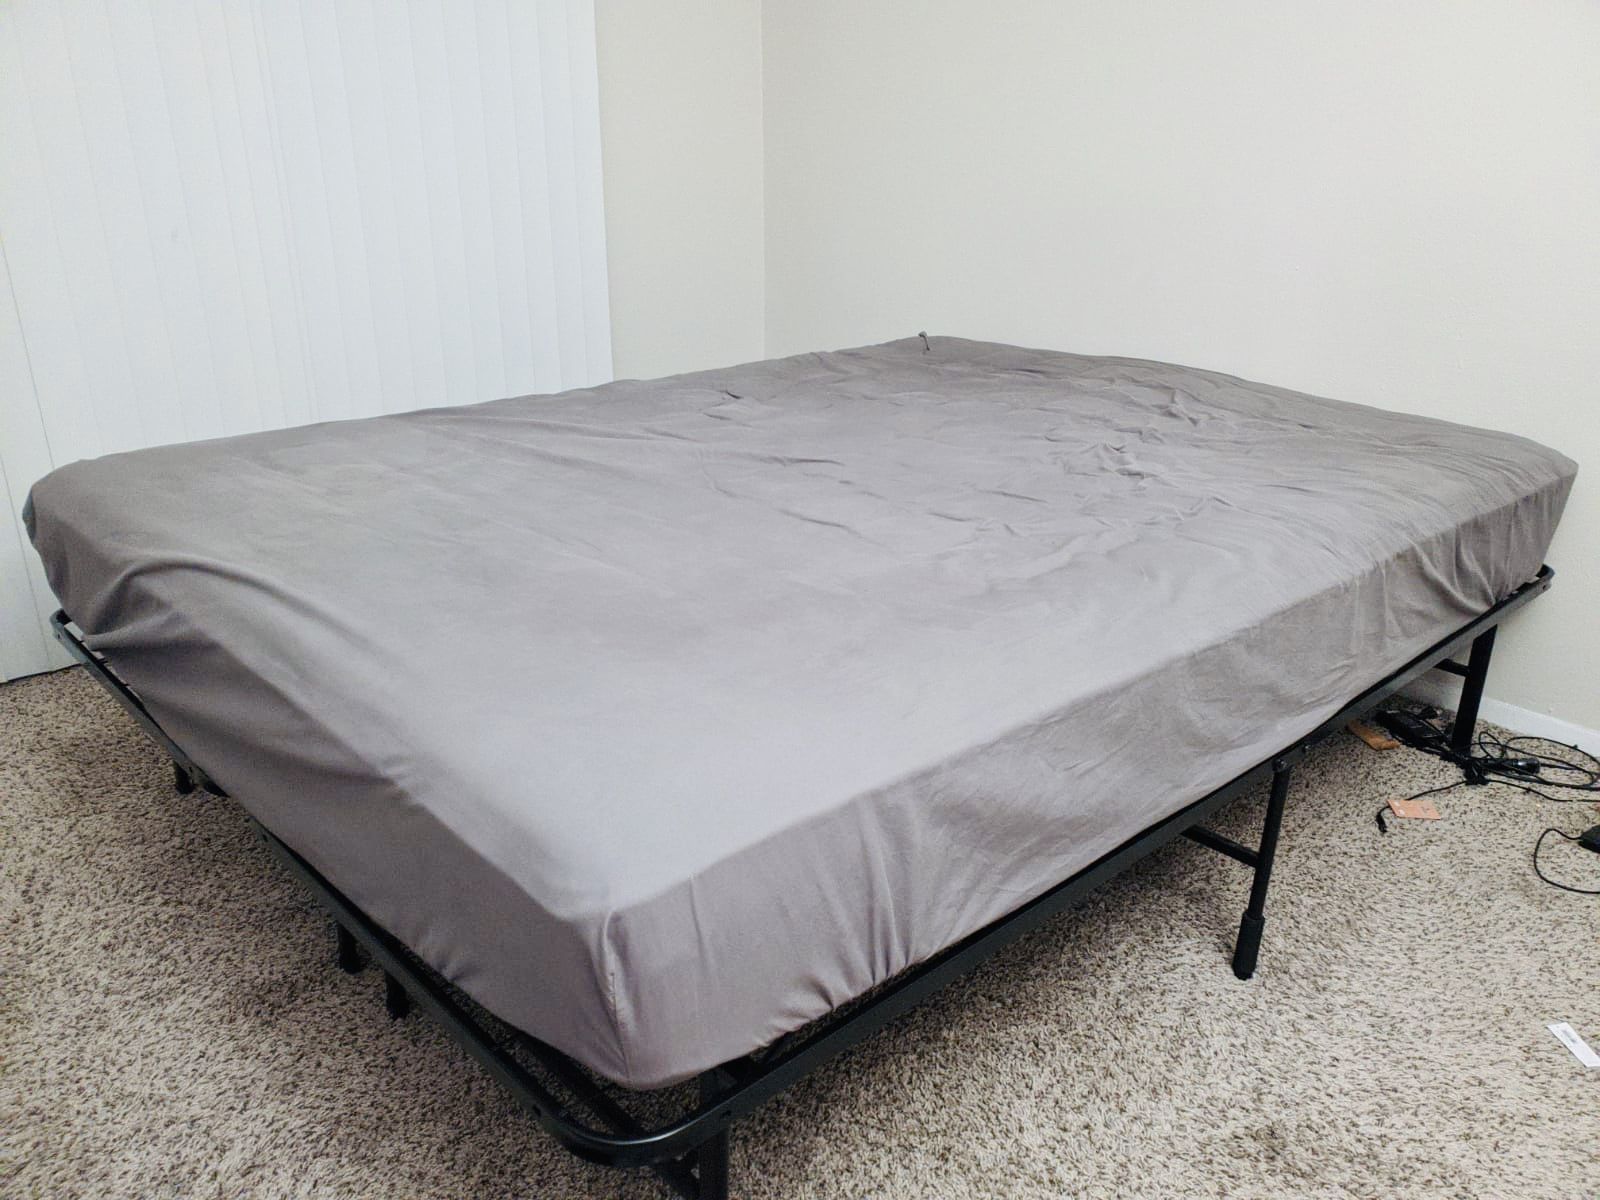 Queen bed frame with mattress